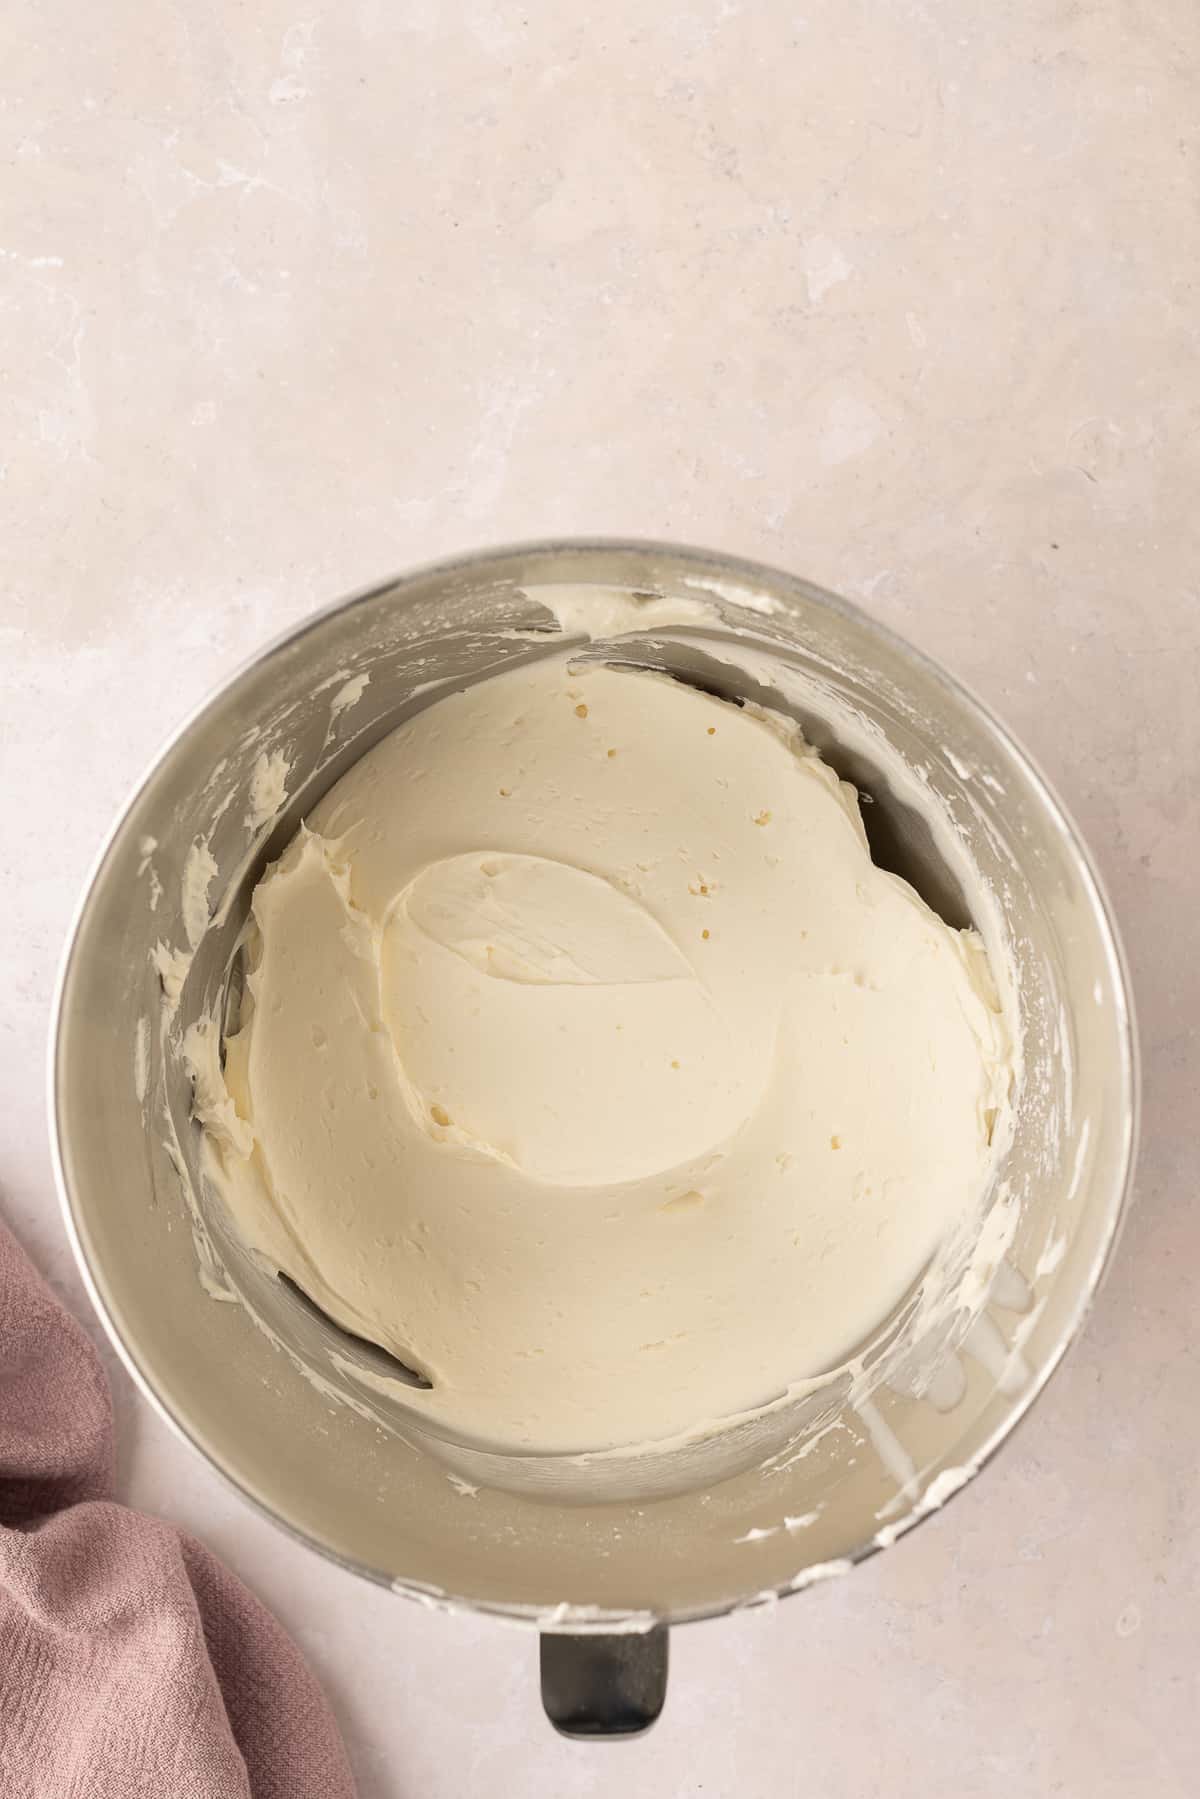 Whipped cream cheese frosting in a silver mixing bowl over a light pink background.